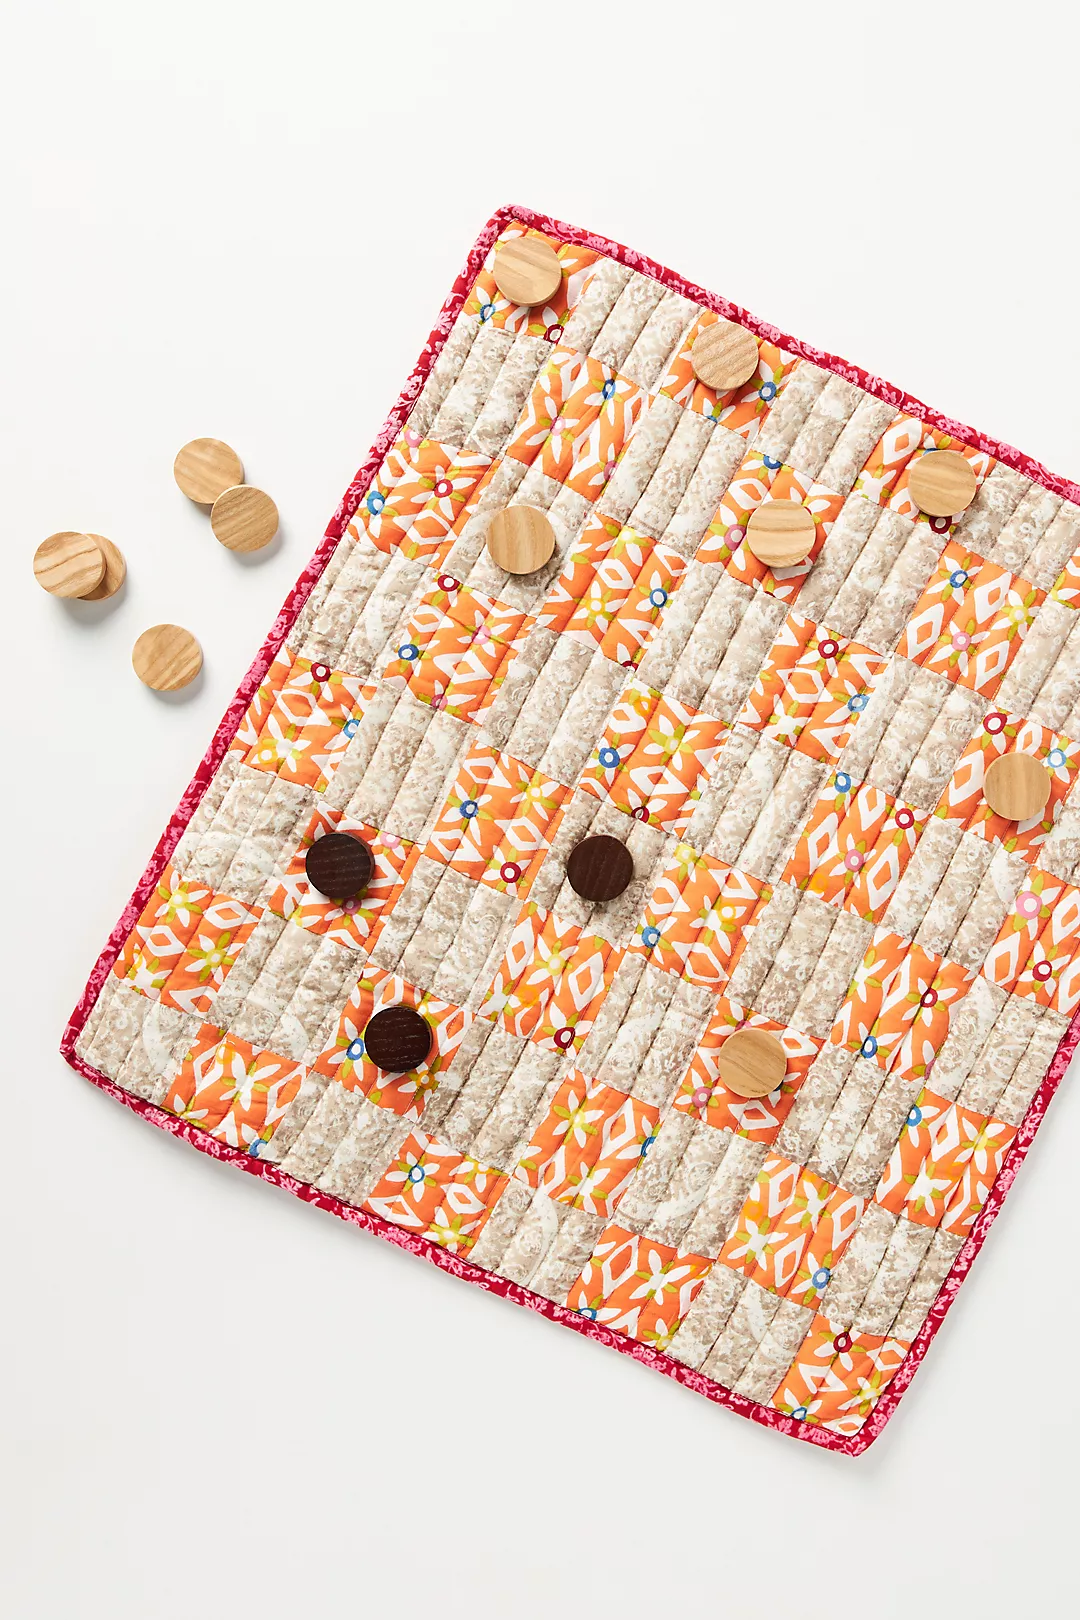 anthropologie.com | Quilted Checkers Game